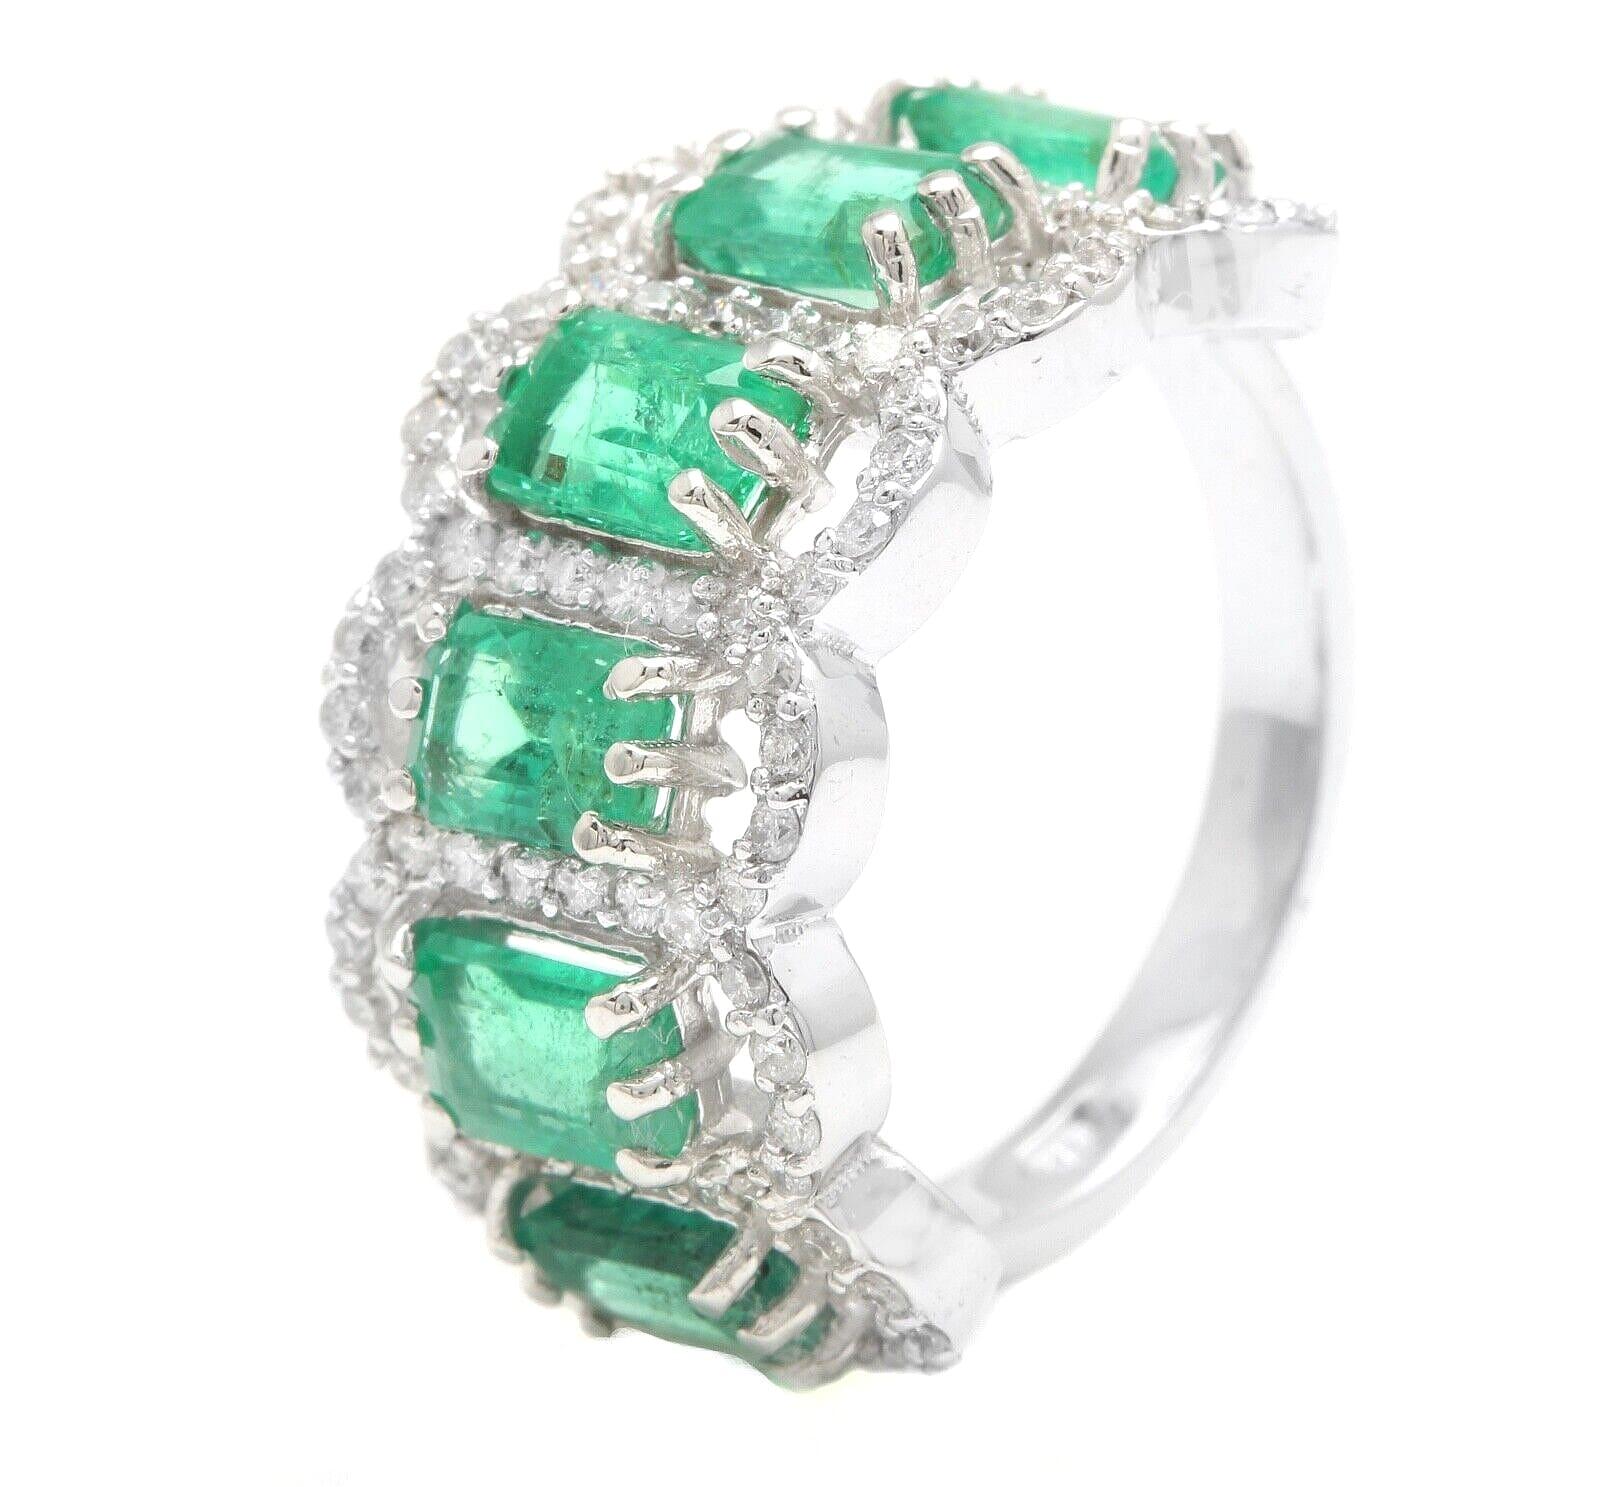 3.68 Carats Natural Emerald and Diamond 14K Solid White Gold Ring

Suggested Replacement Value: $6,500.00

Total Natural Green Emerald Weight is: Approx. 3.02 Carats 

Emerald Measures: Approx. 6.00 x 4.00 mm

Natural Round Diamonds Weight: Approx.